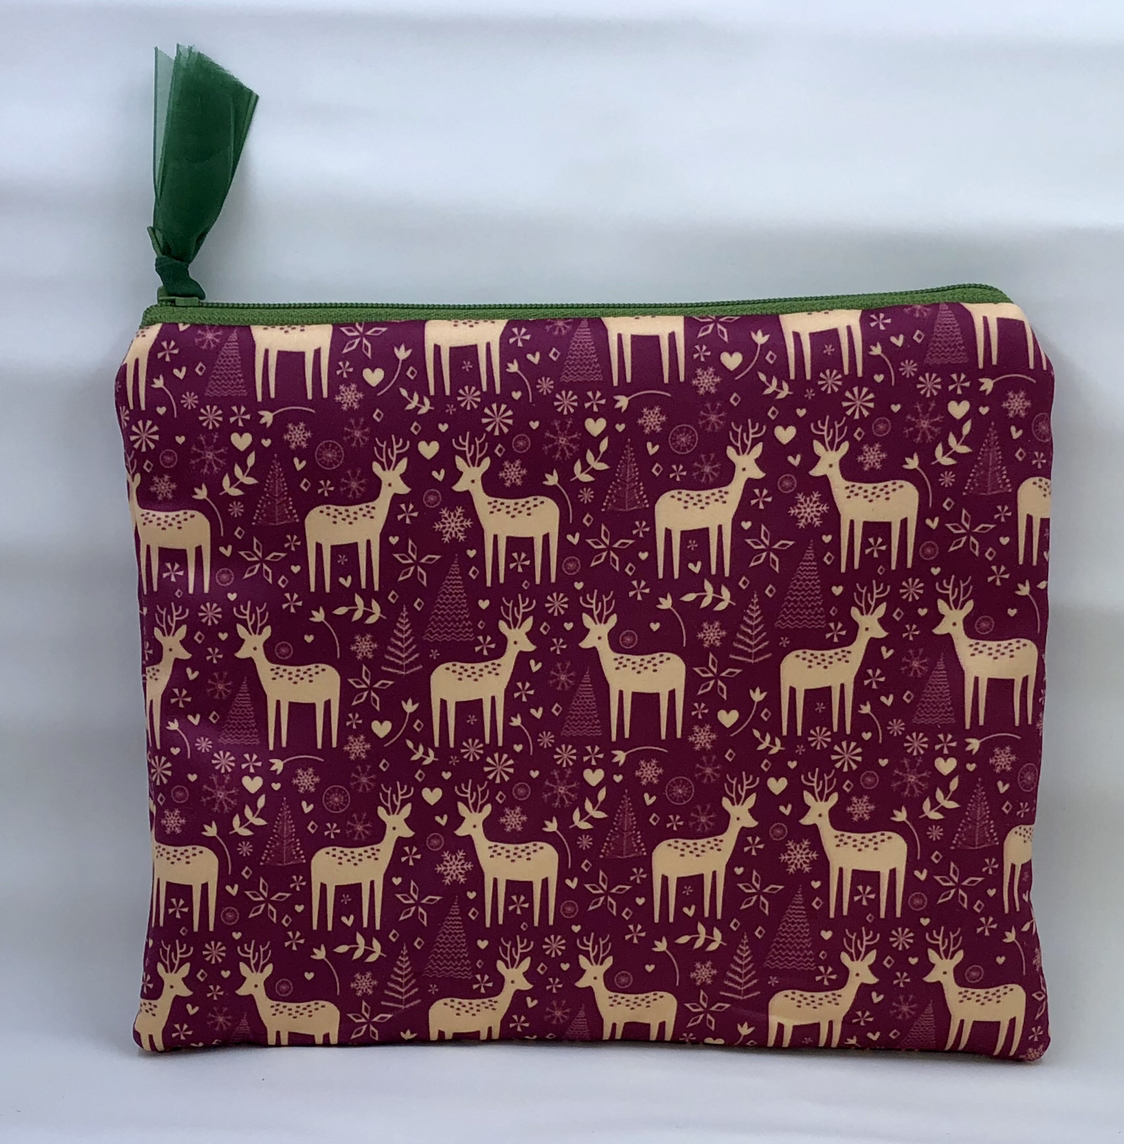 from 'Wambui Made It' Pouch Collection